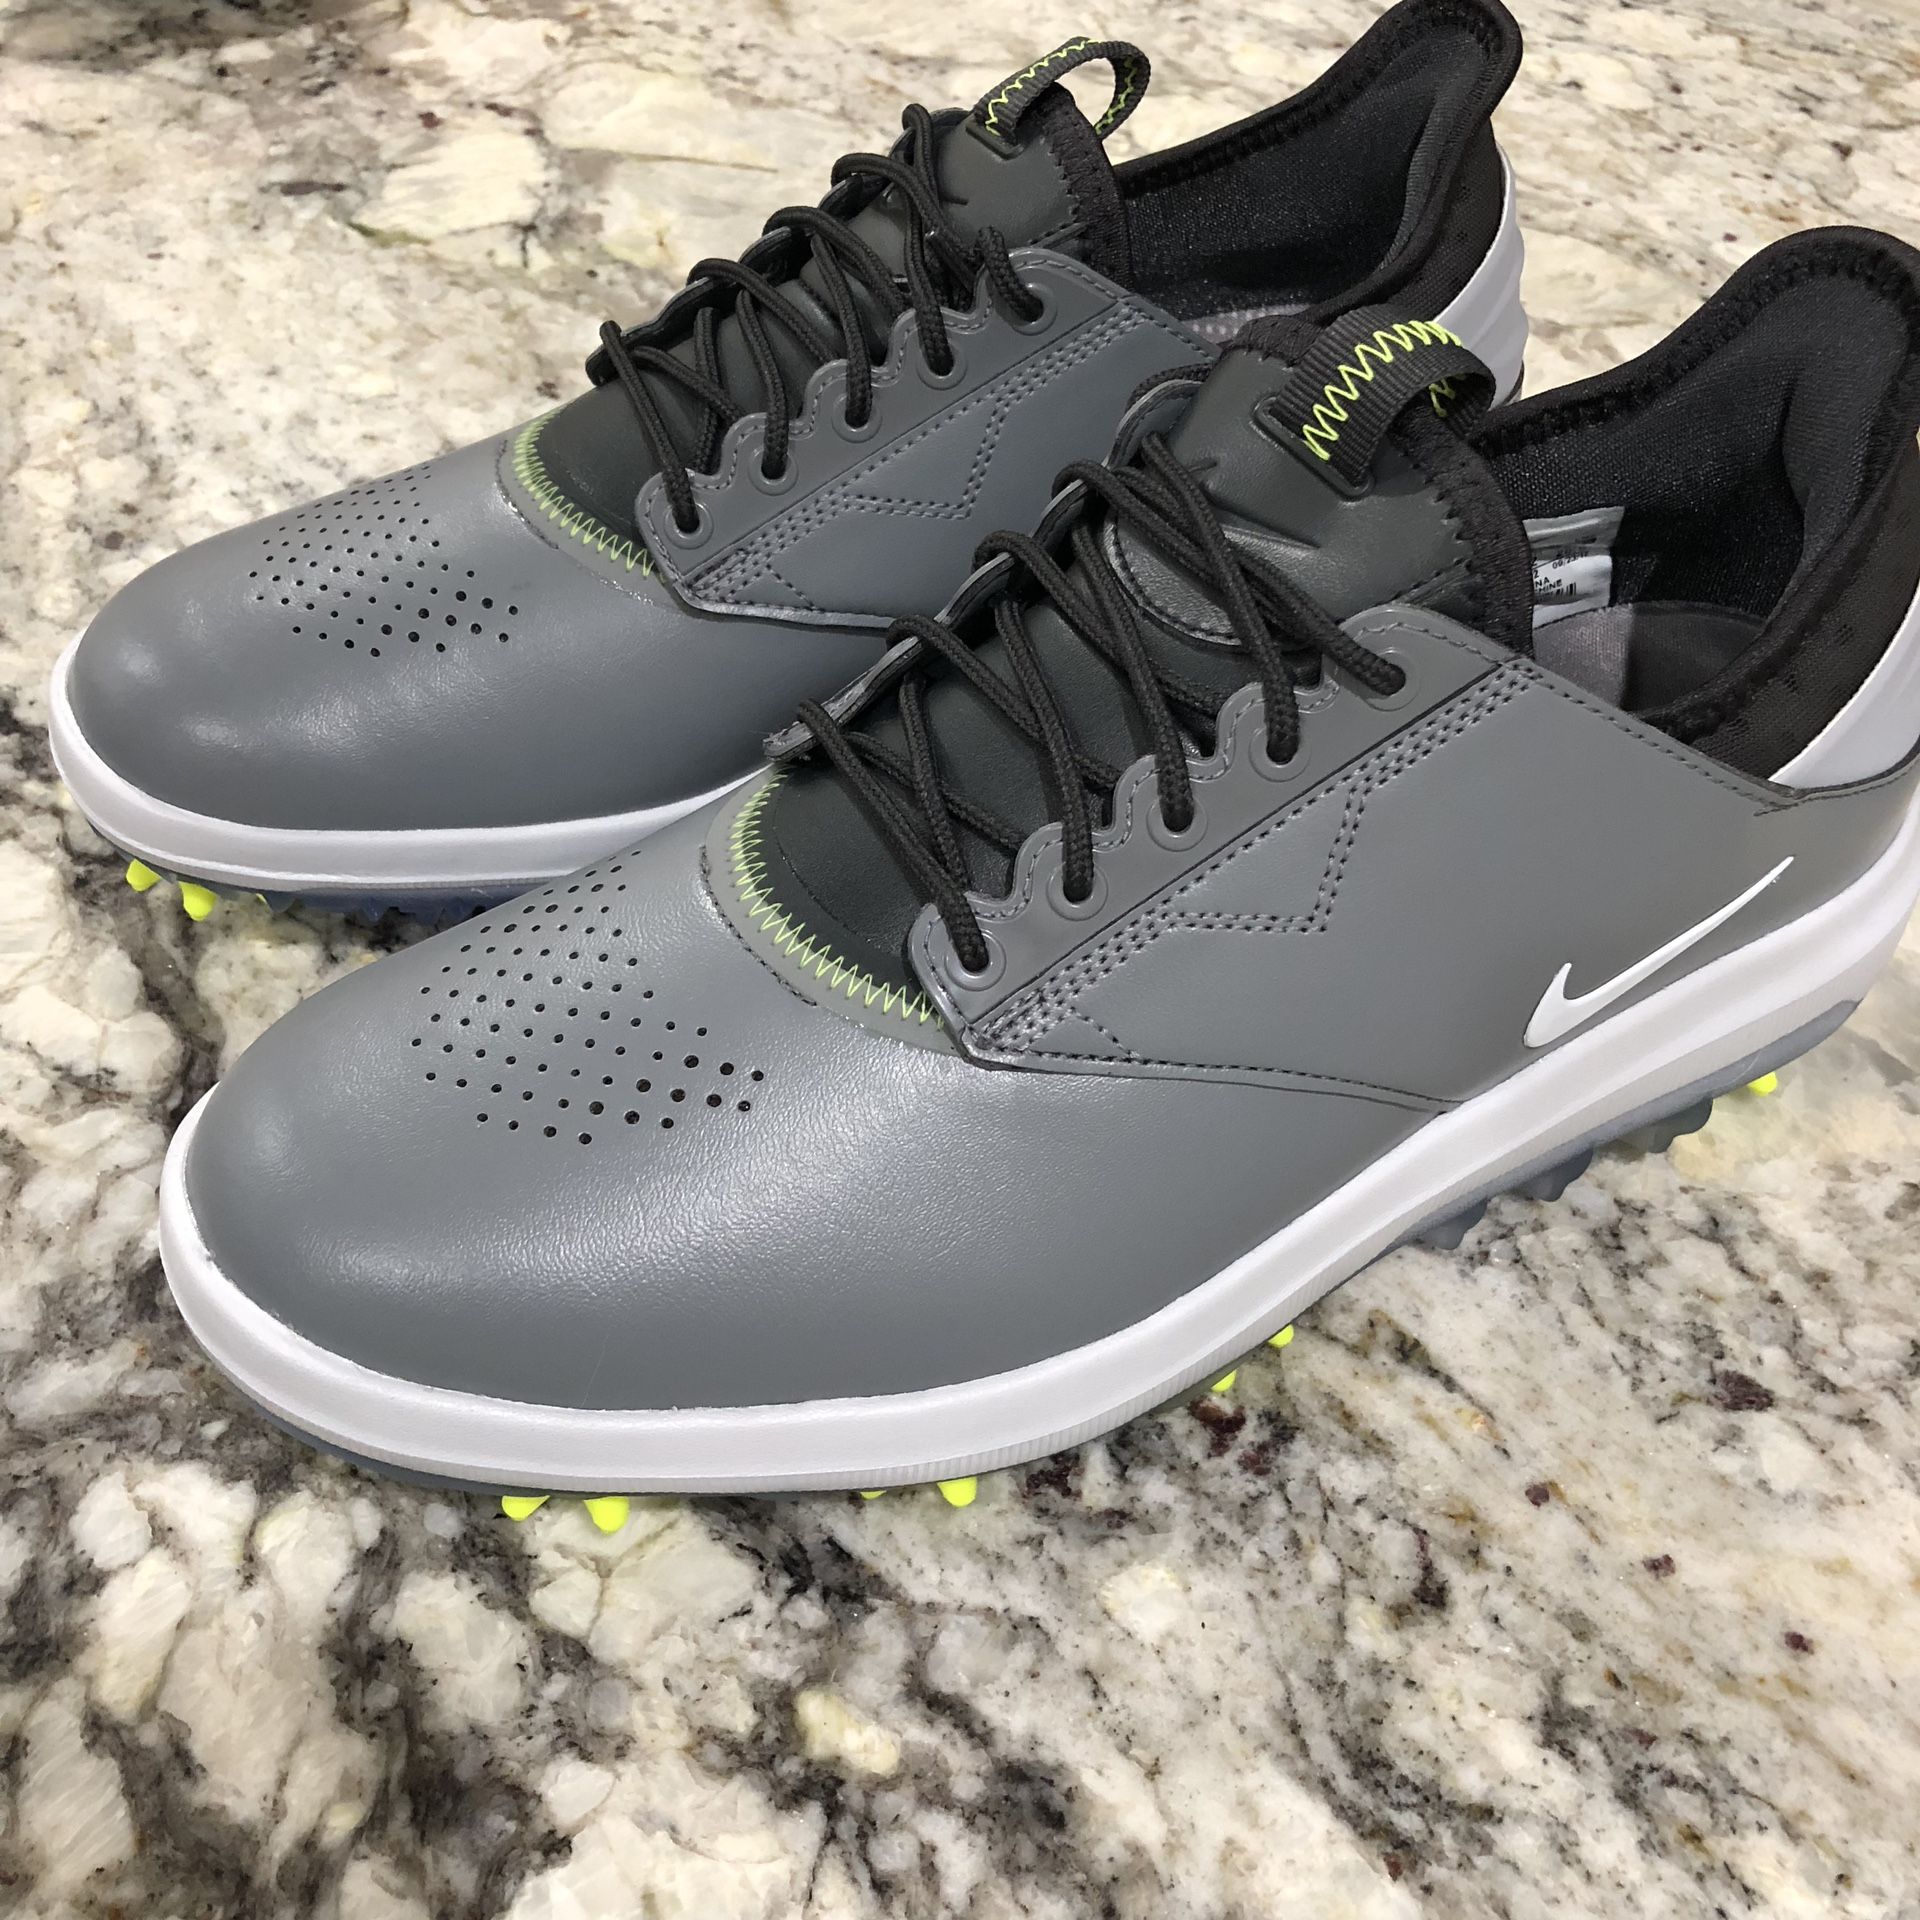 NEW! Nike Air Zoom Direct Men's Golf Shoes Cool Grey/White 923965-002 Size 8.5